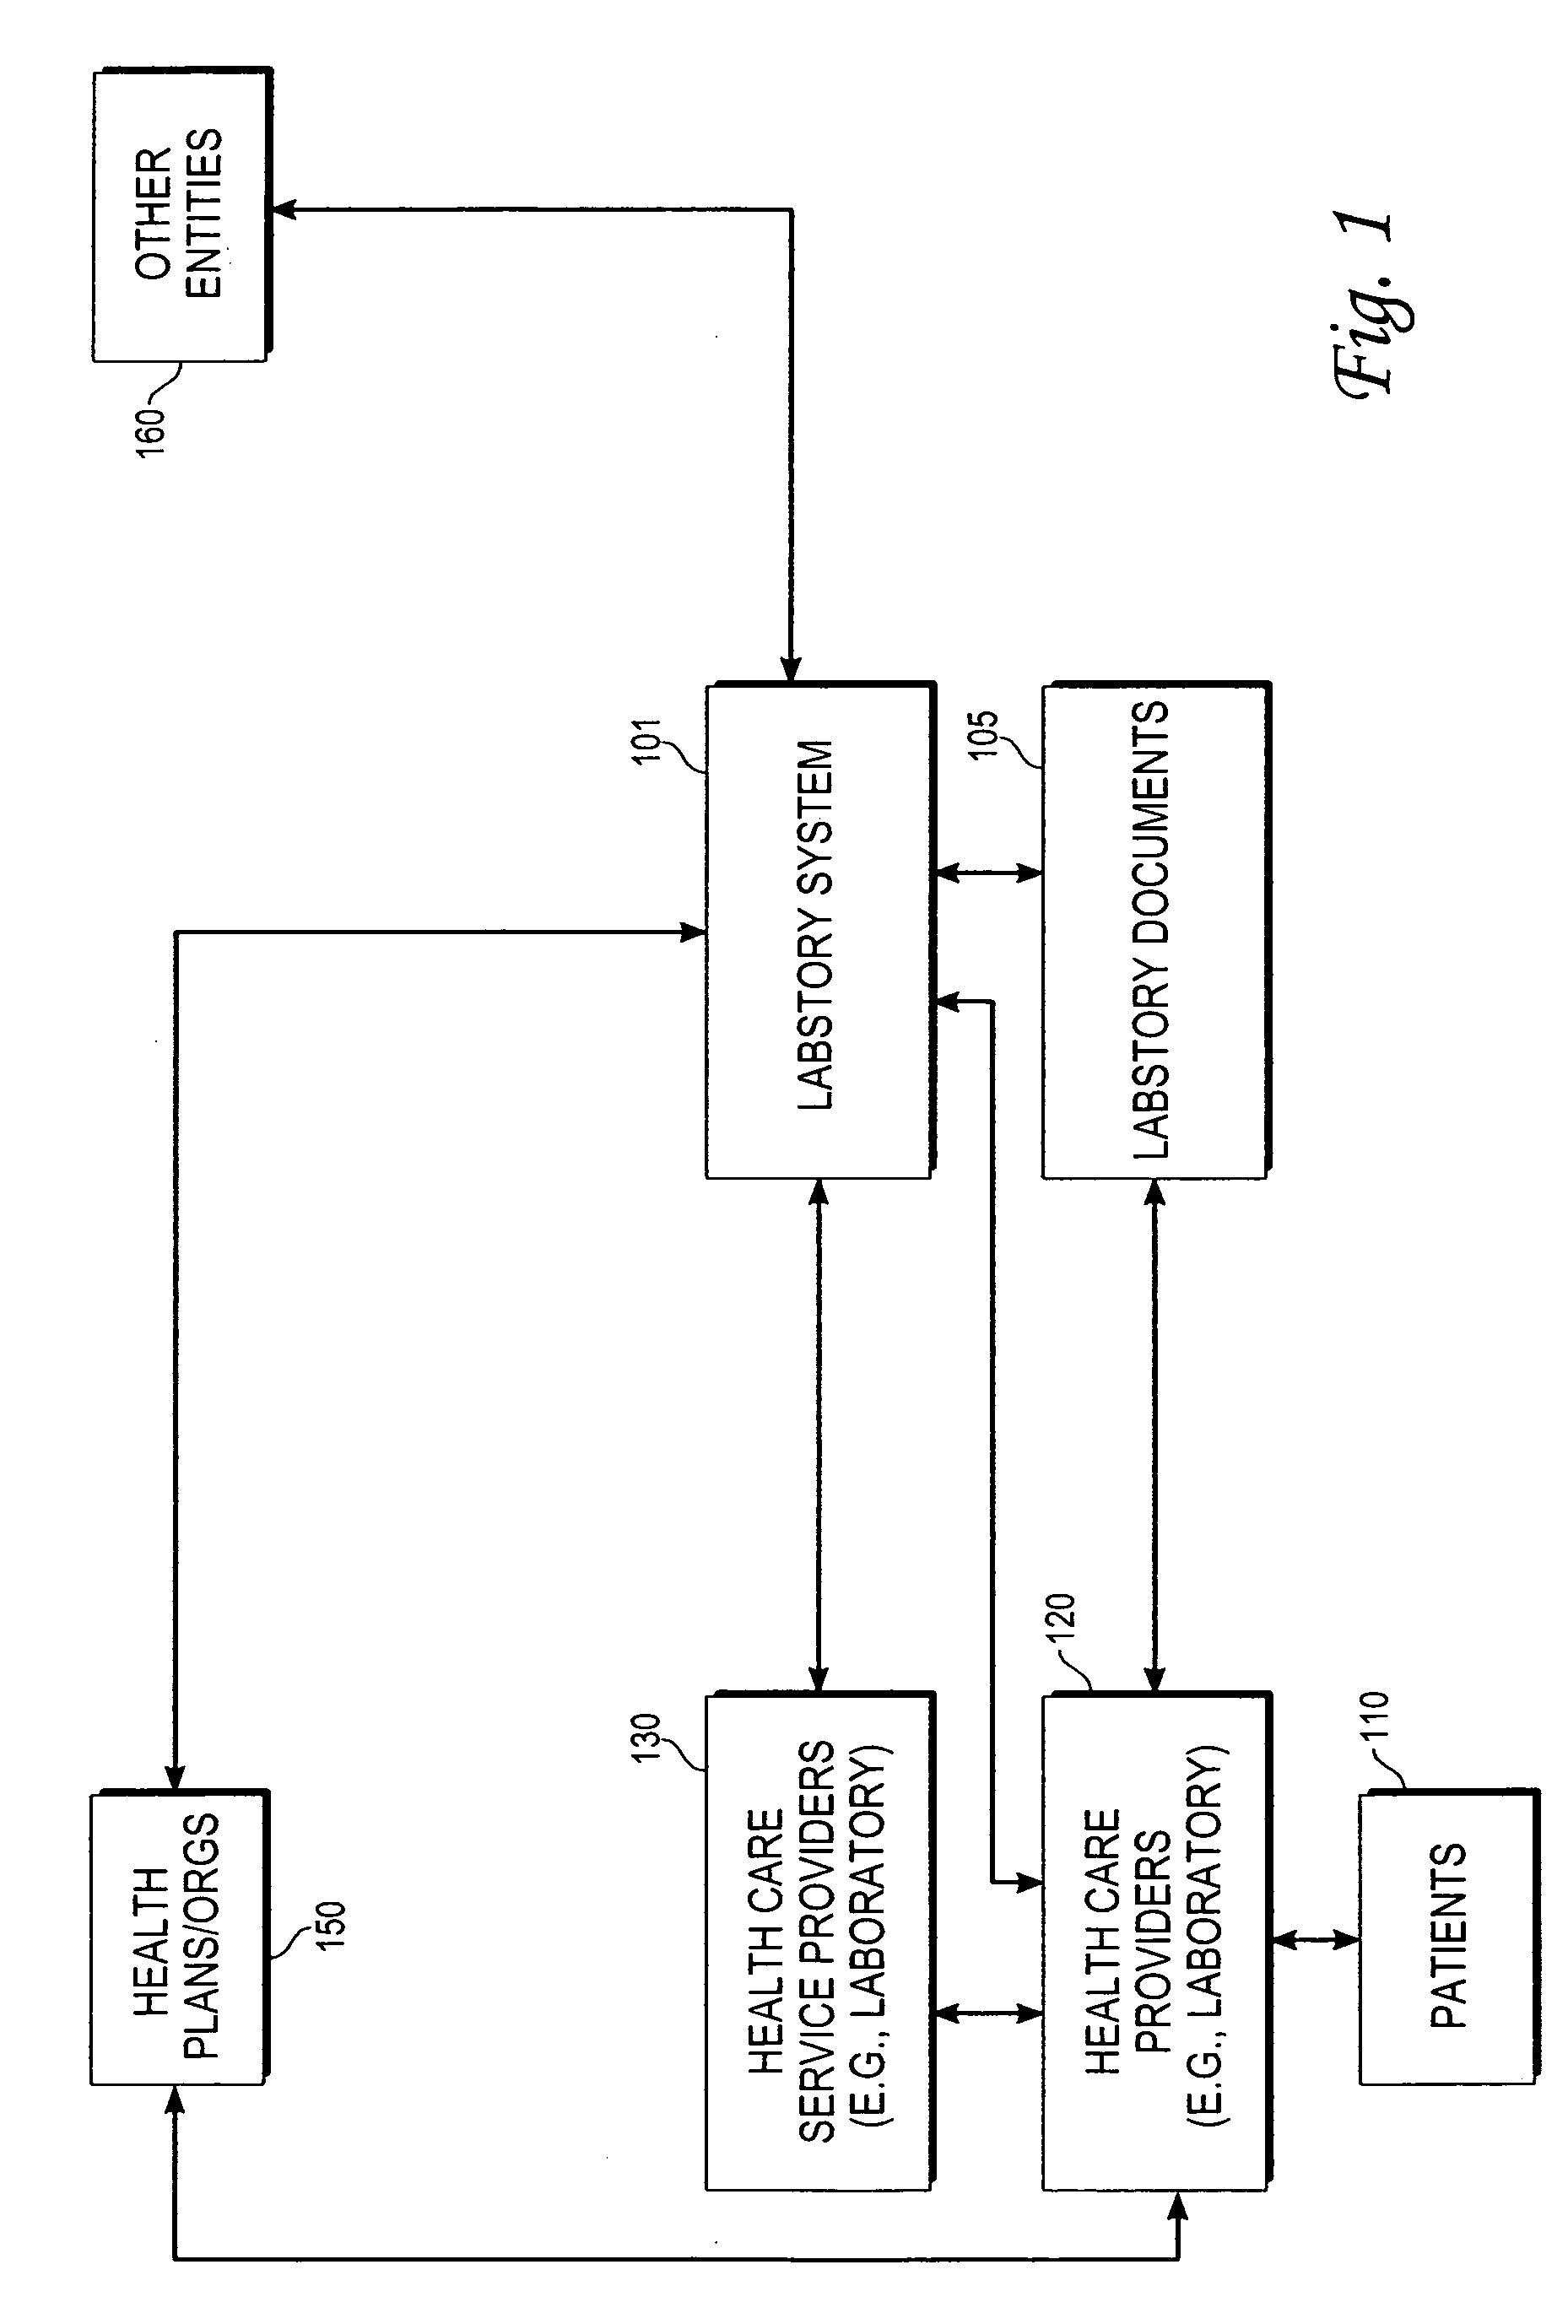 Method, apparatus and system for providing targeted information in relation to laboratory and other medical services